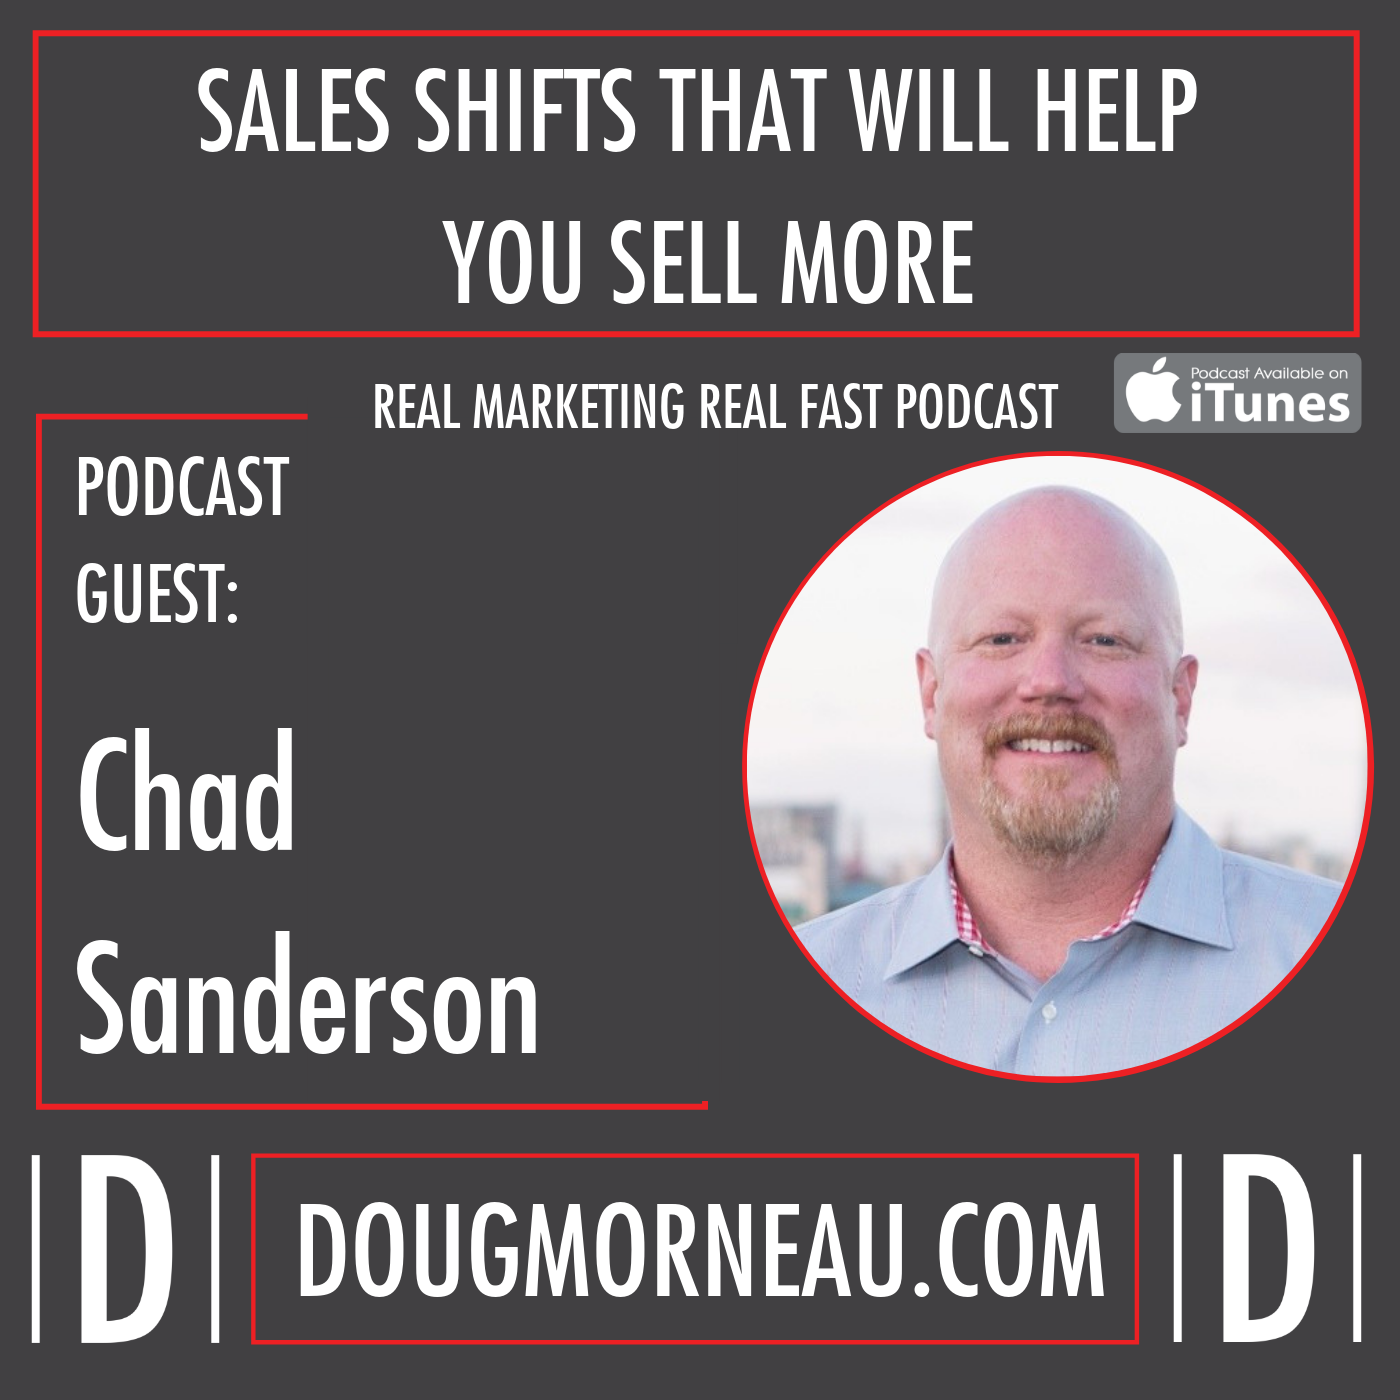 SALES SHIFTS THAT WILL HELP YOU SELL MORE - CHAD SANDERSON - DOUG MORNEAU - REAL MARKETING REAL FAST PODCAST